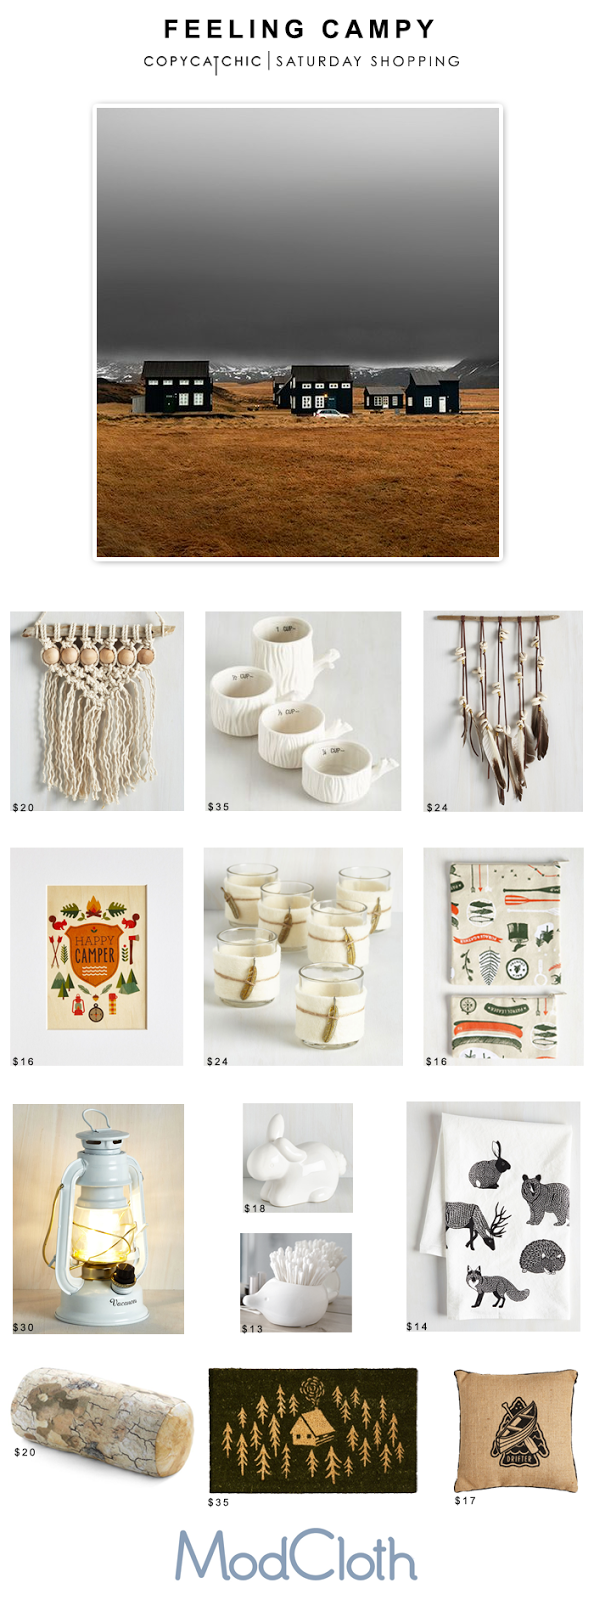 Camp and Cabin Decor with Modcloth and Copy Cat Chic